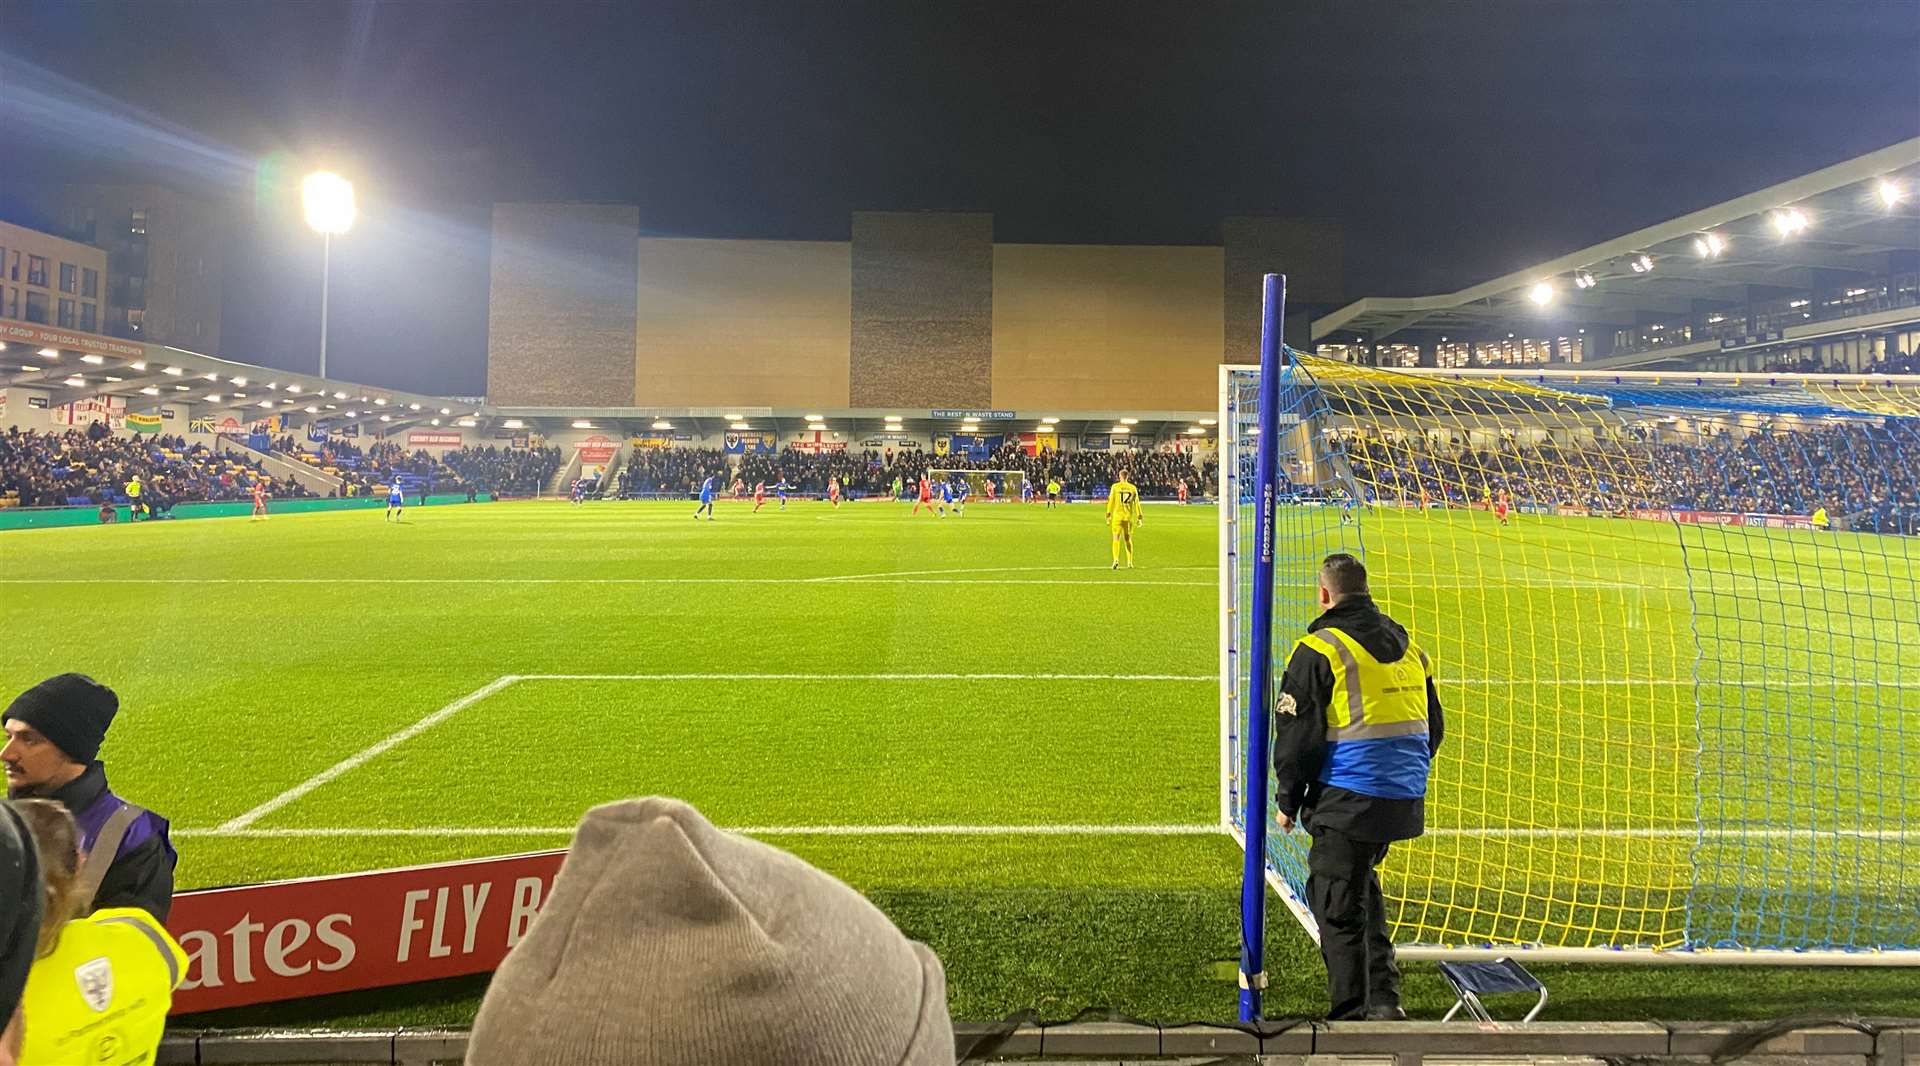 The view from the away end during Ramsgate's FA Cup tie at Plough Lane.